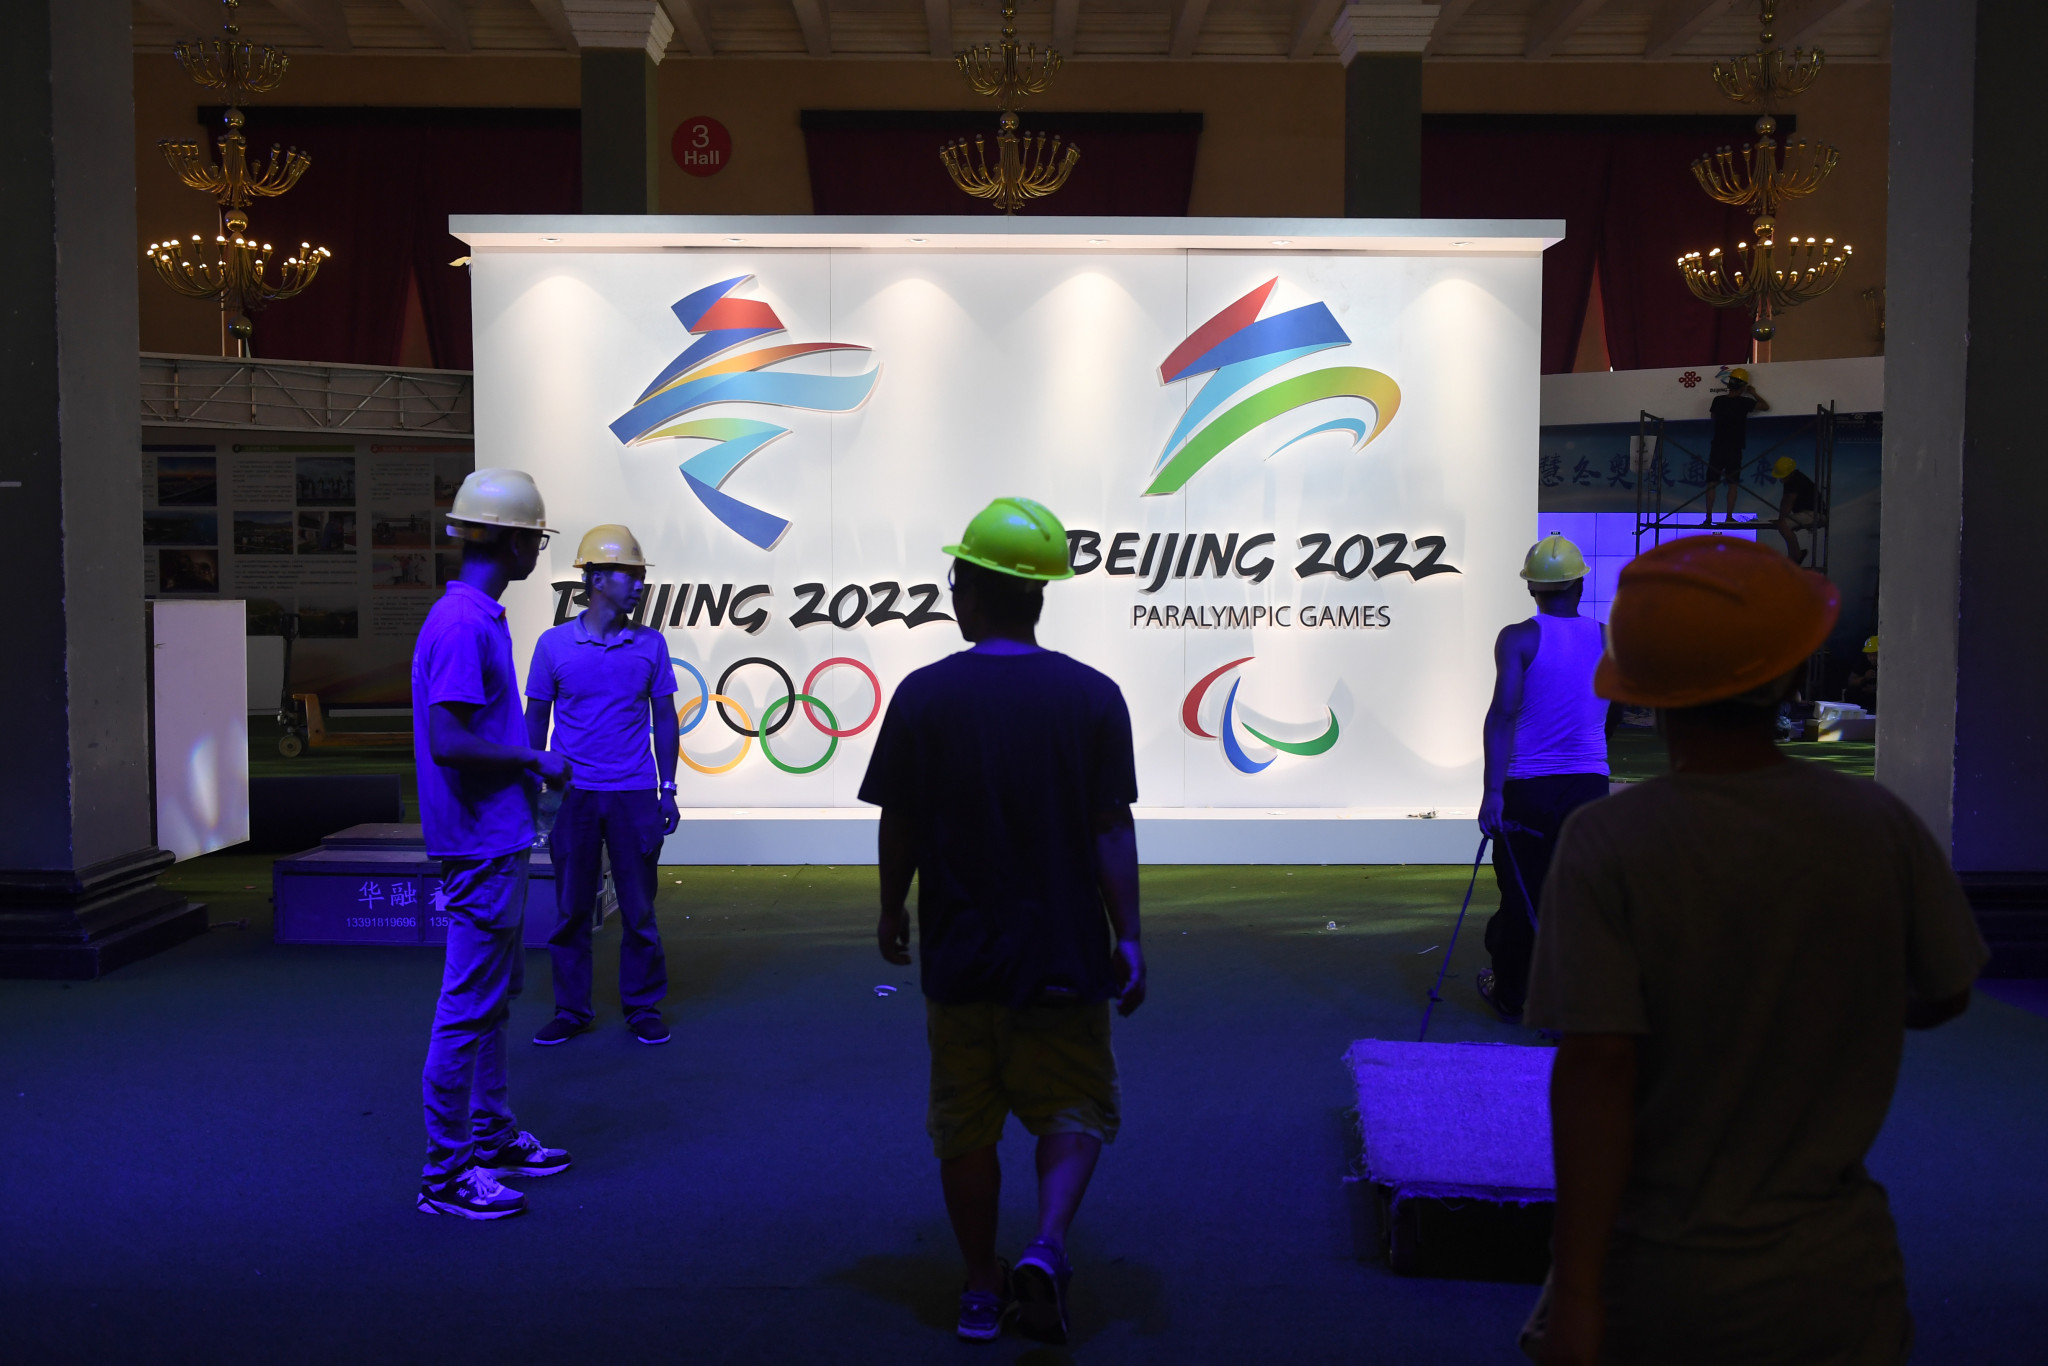 There have been calls for Beijing 2022 to be boycotted in response to China's disturbing record on human rights ©Getty Images